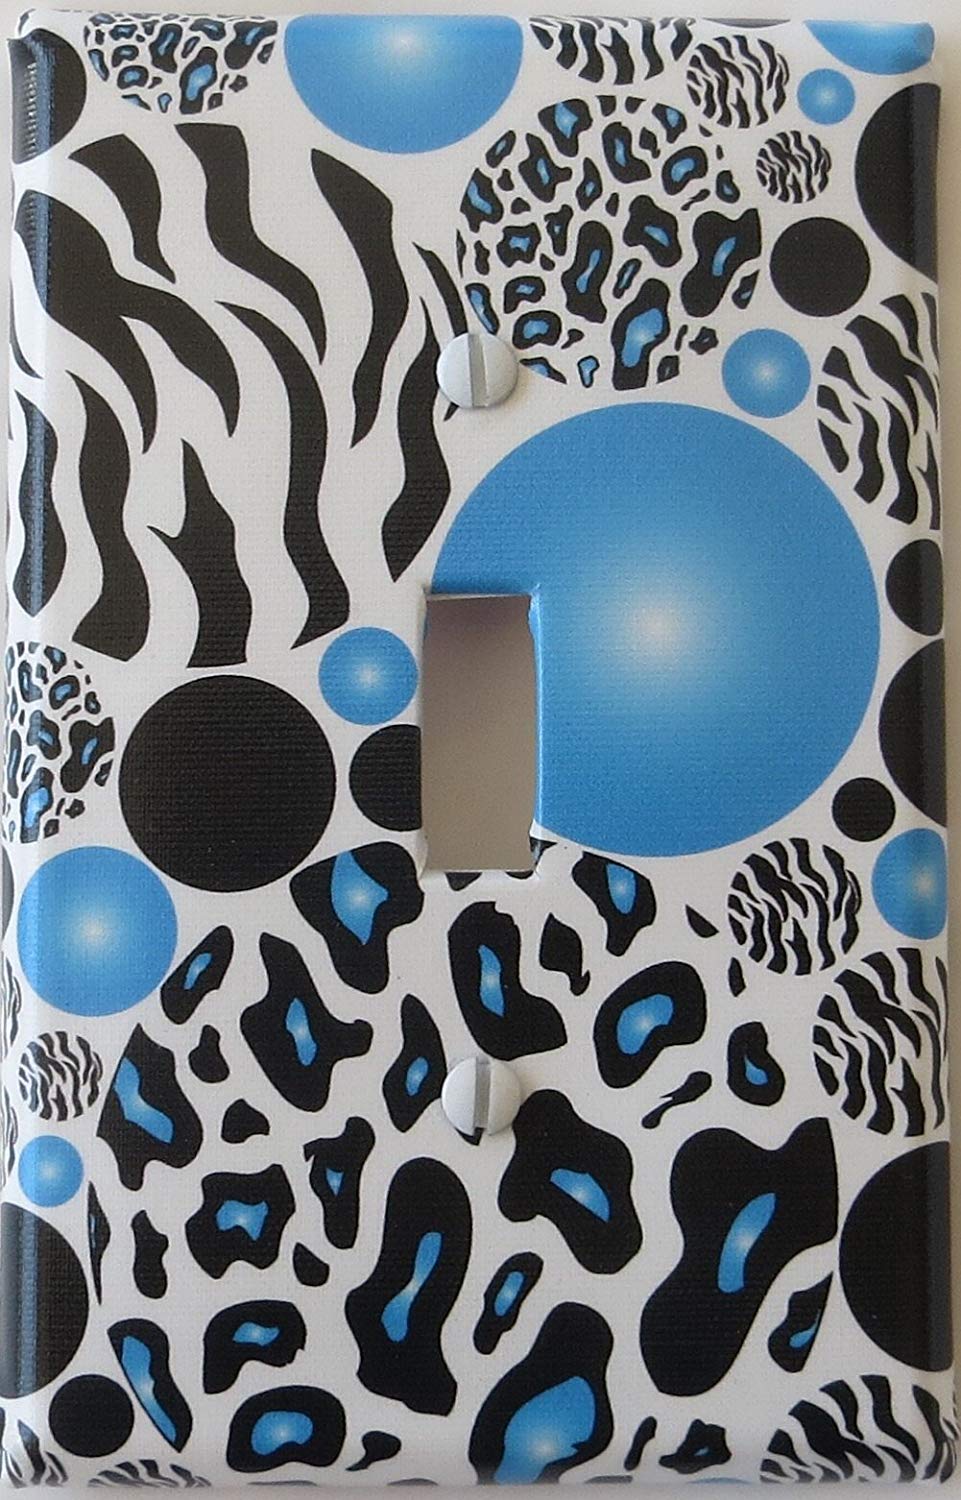 Blue and Black Leopard Print Dots Single Toggle Light Switch Plate Covers with Zebra Print Dots